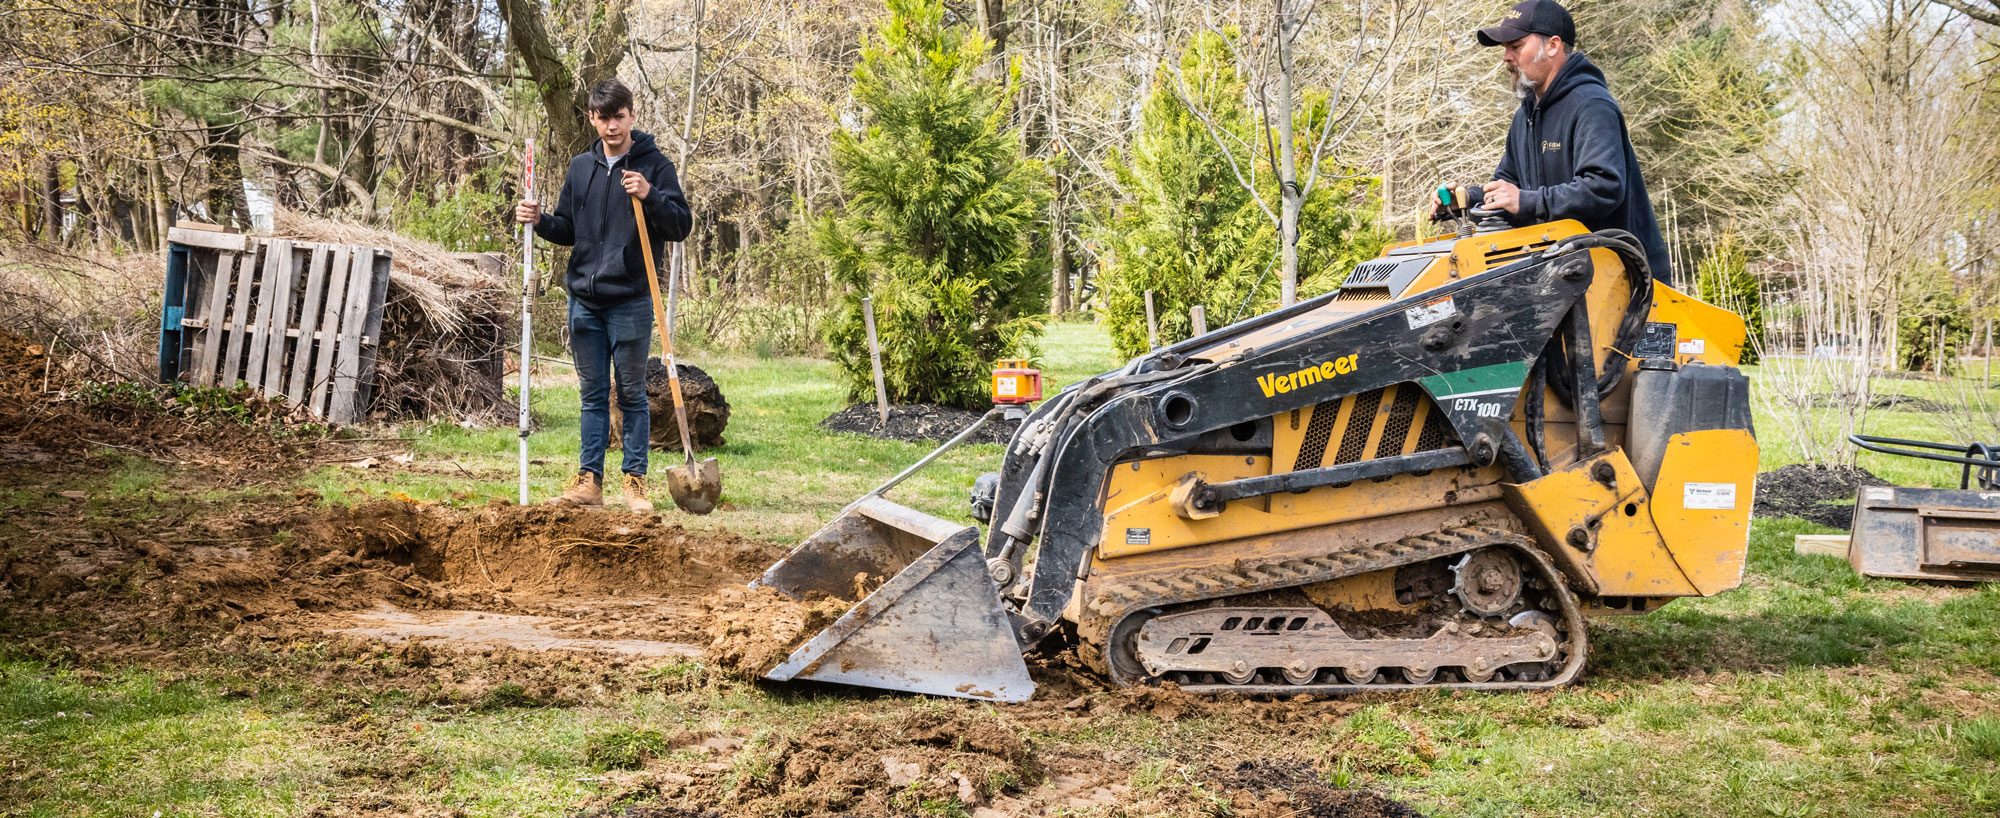 professional excavation contractors in pa